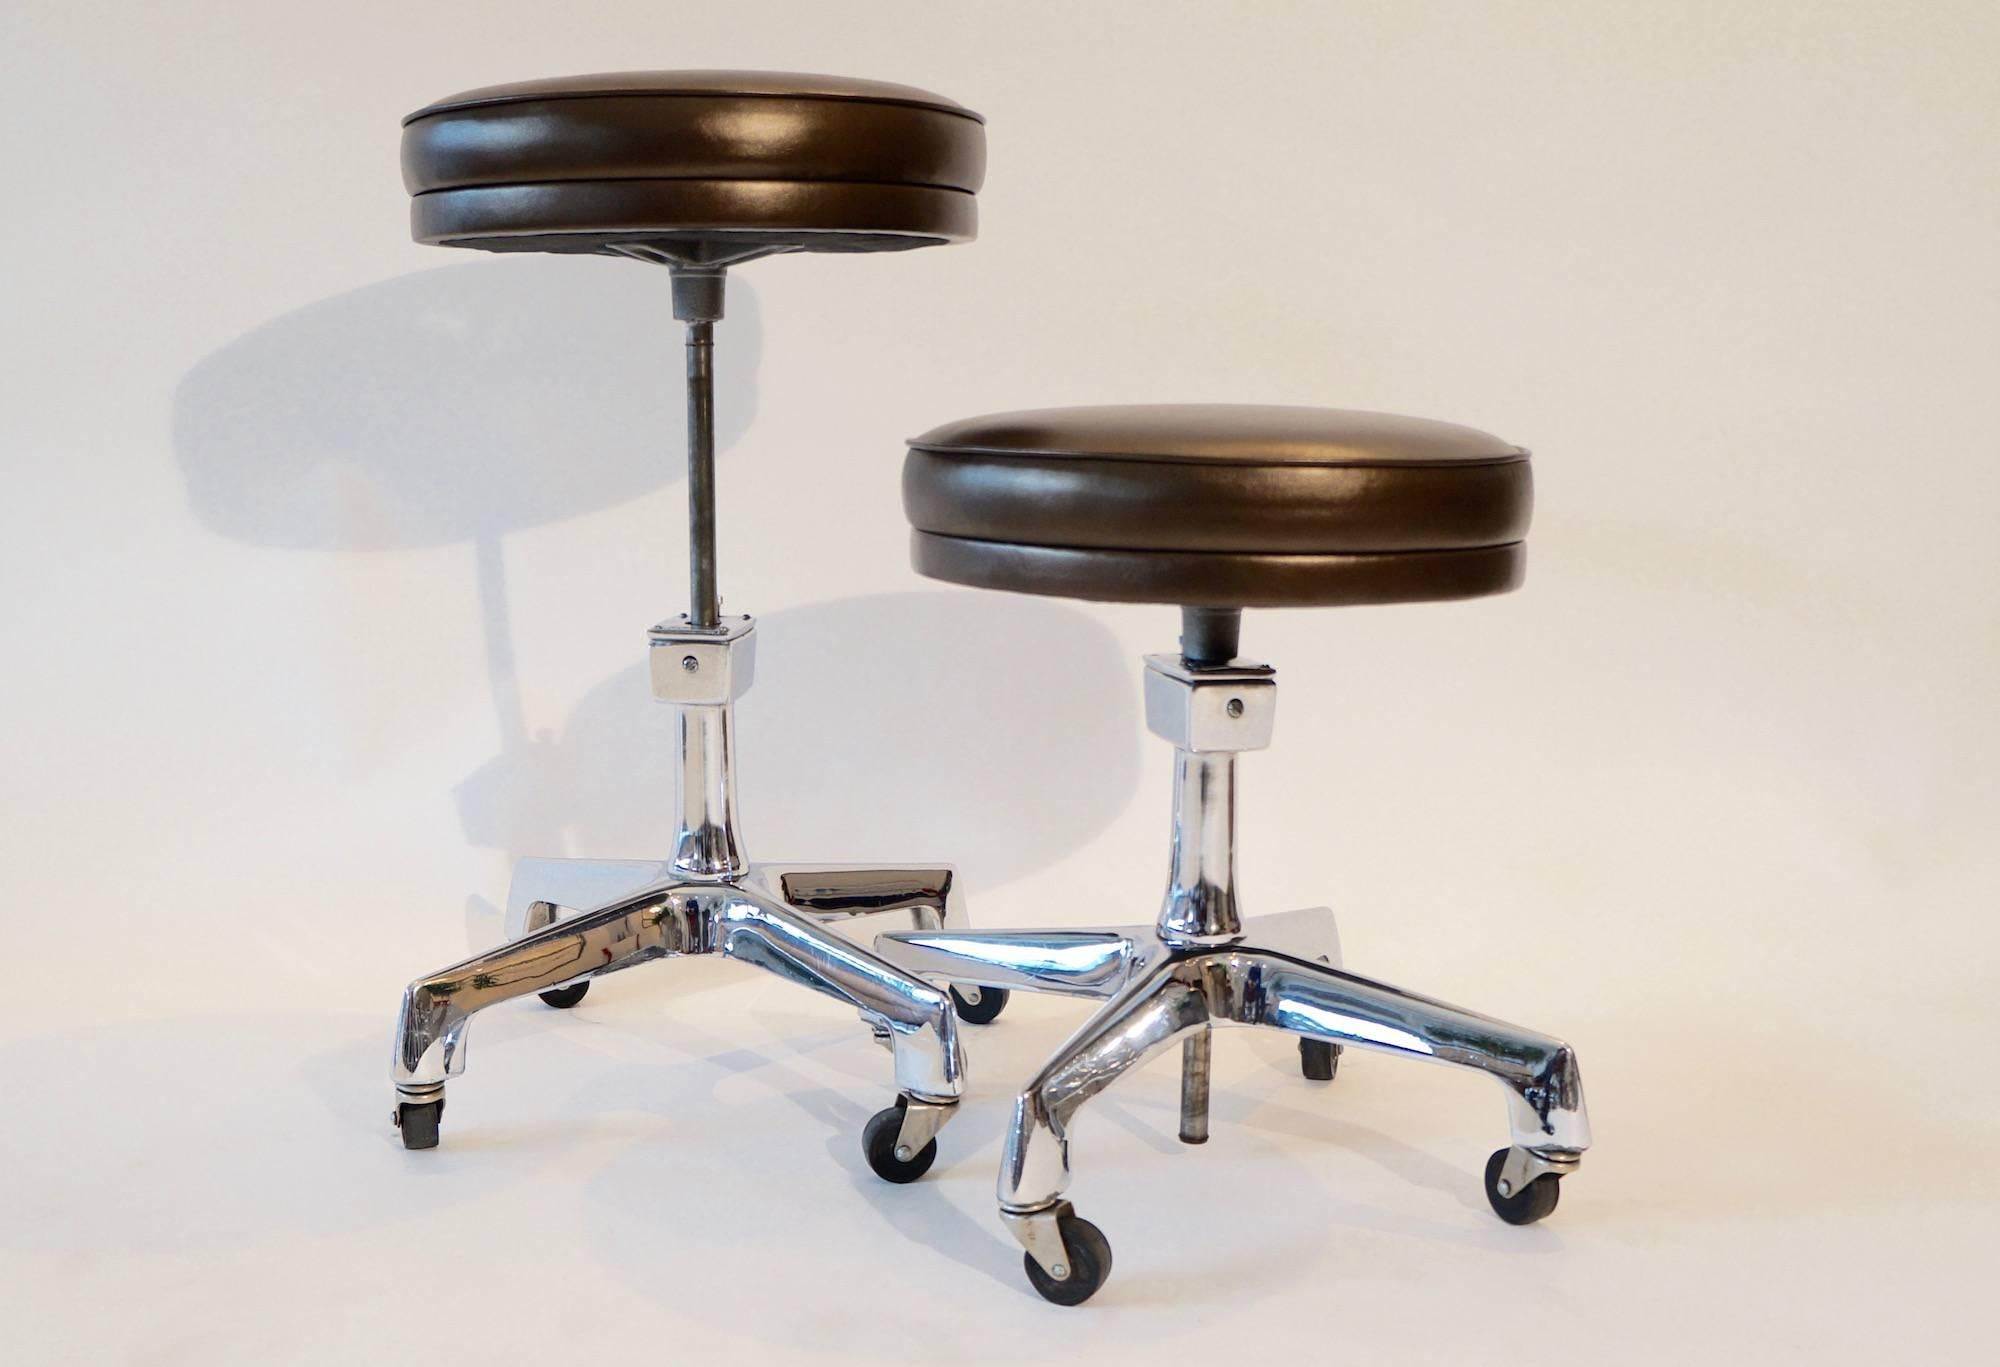 Two F.F. Koenigkramer adjustable Industrial stools. Re-upholstered in a metallic chocolate brown leather.

Also sold individually 1050.00.